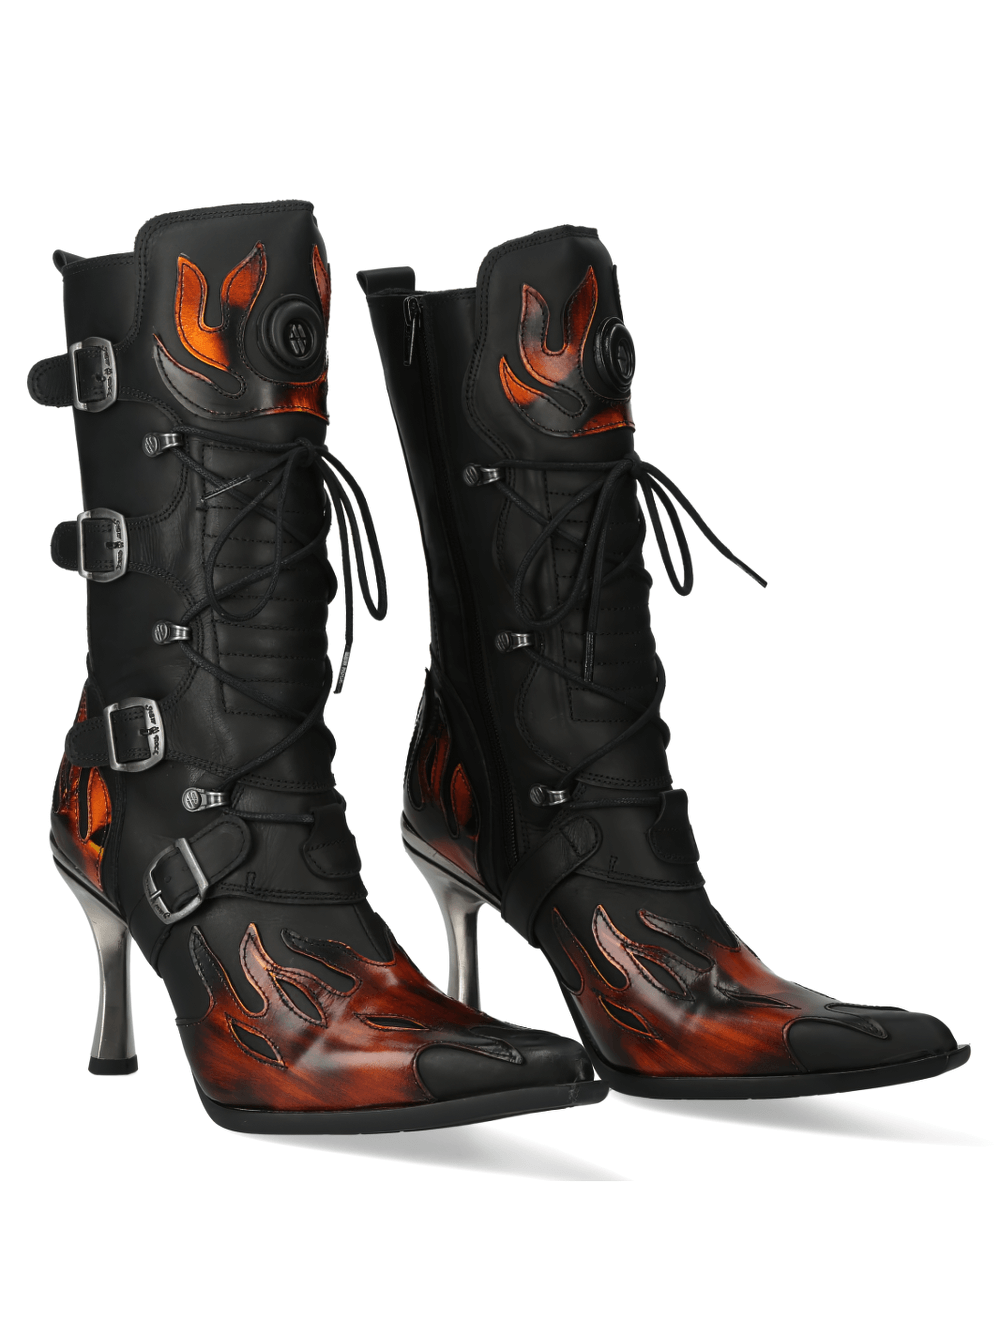 NEW ROCK Flame Accented Heeled Boots with Buckles